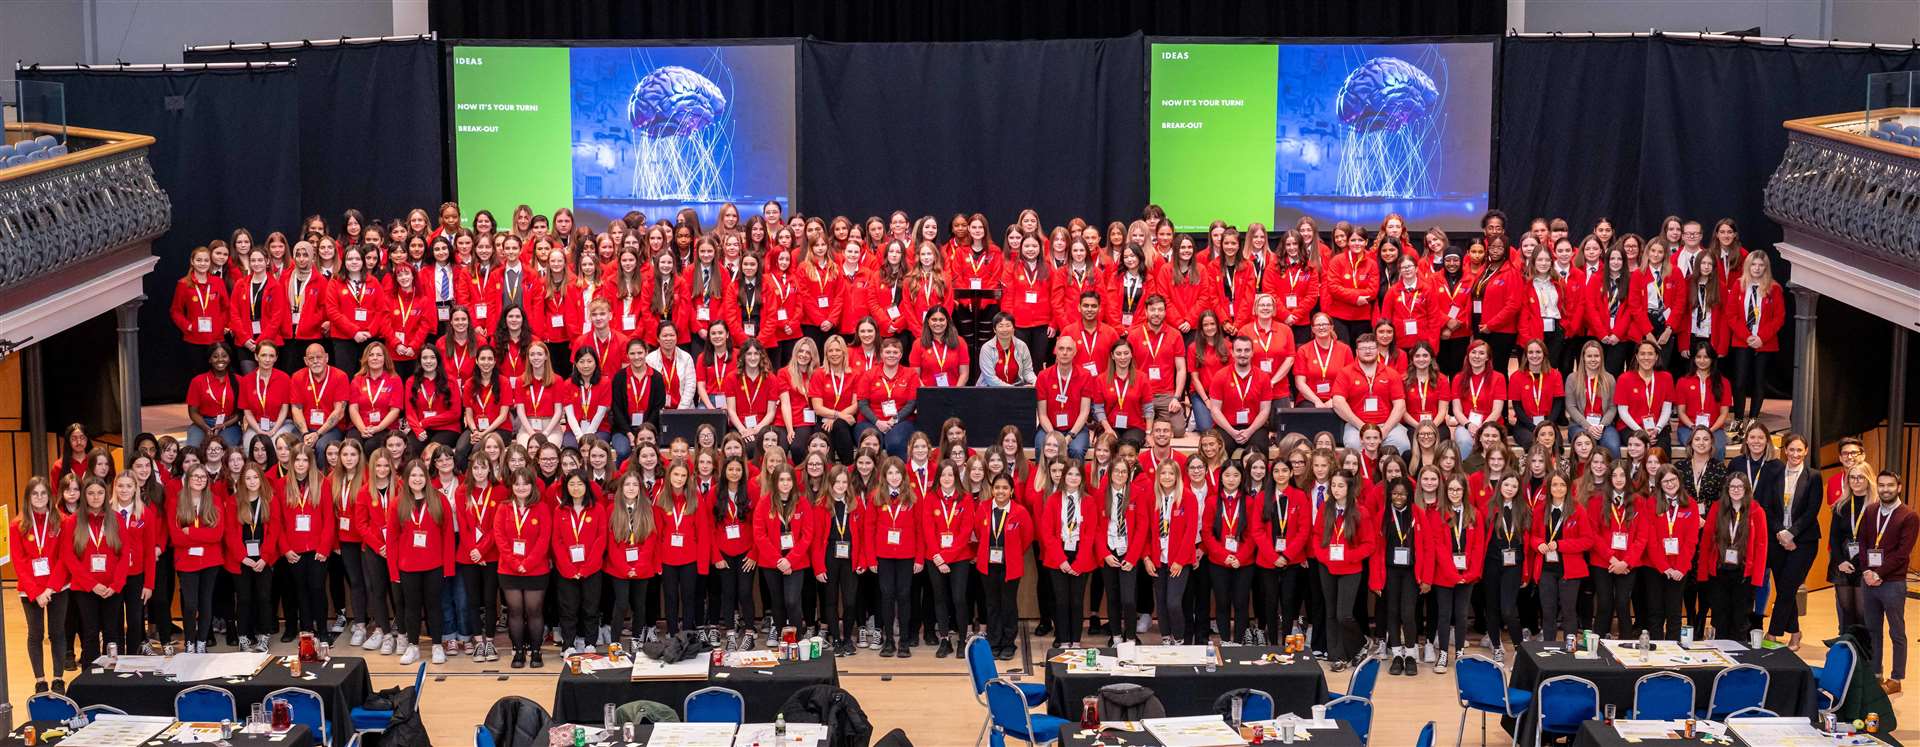 This year's participants at the Girls in Energy conference